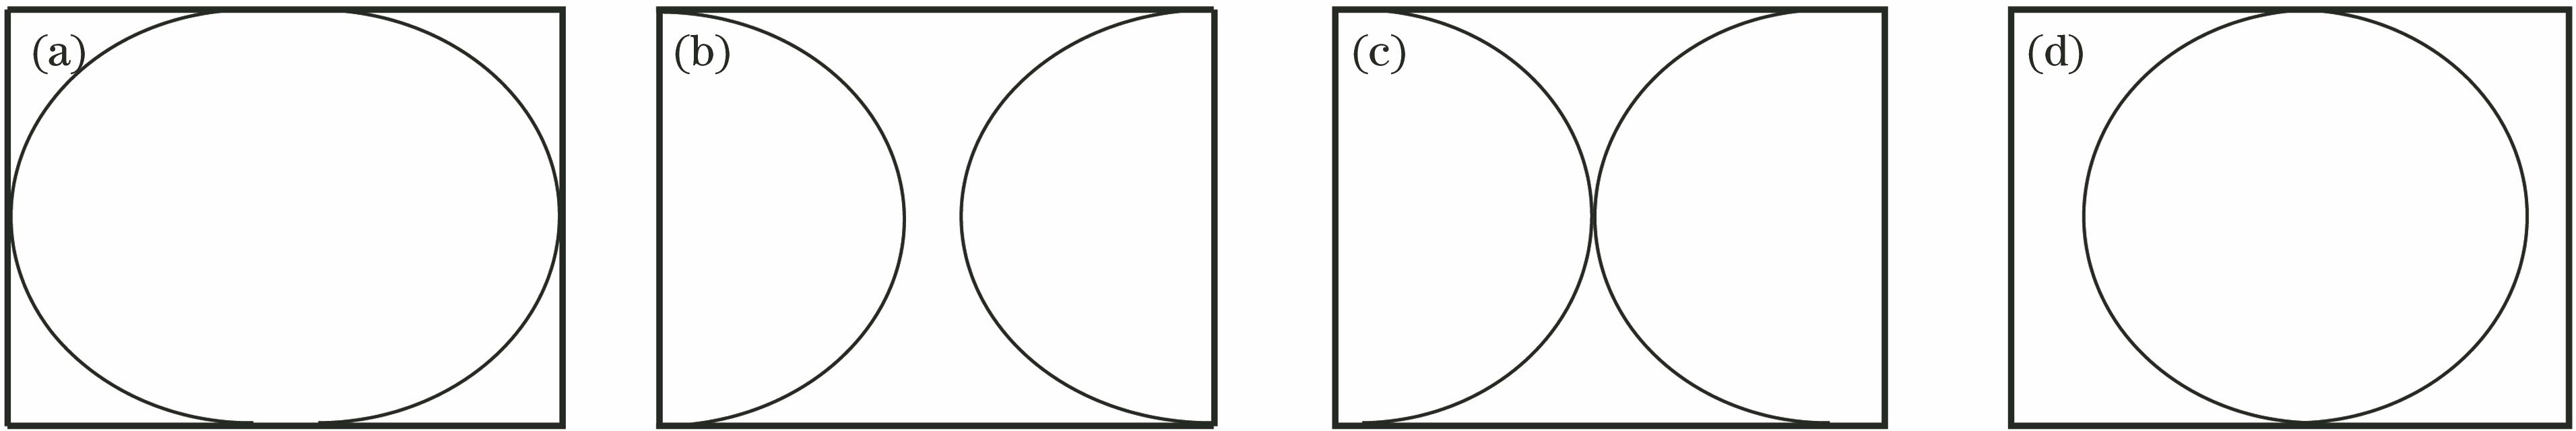 (a)-(b) Possible contact between the interface and ITO glass; (c)-(d) possible contact between two interfaces